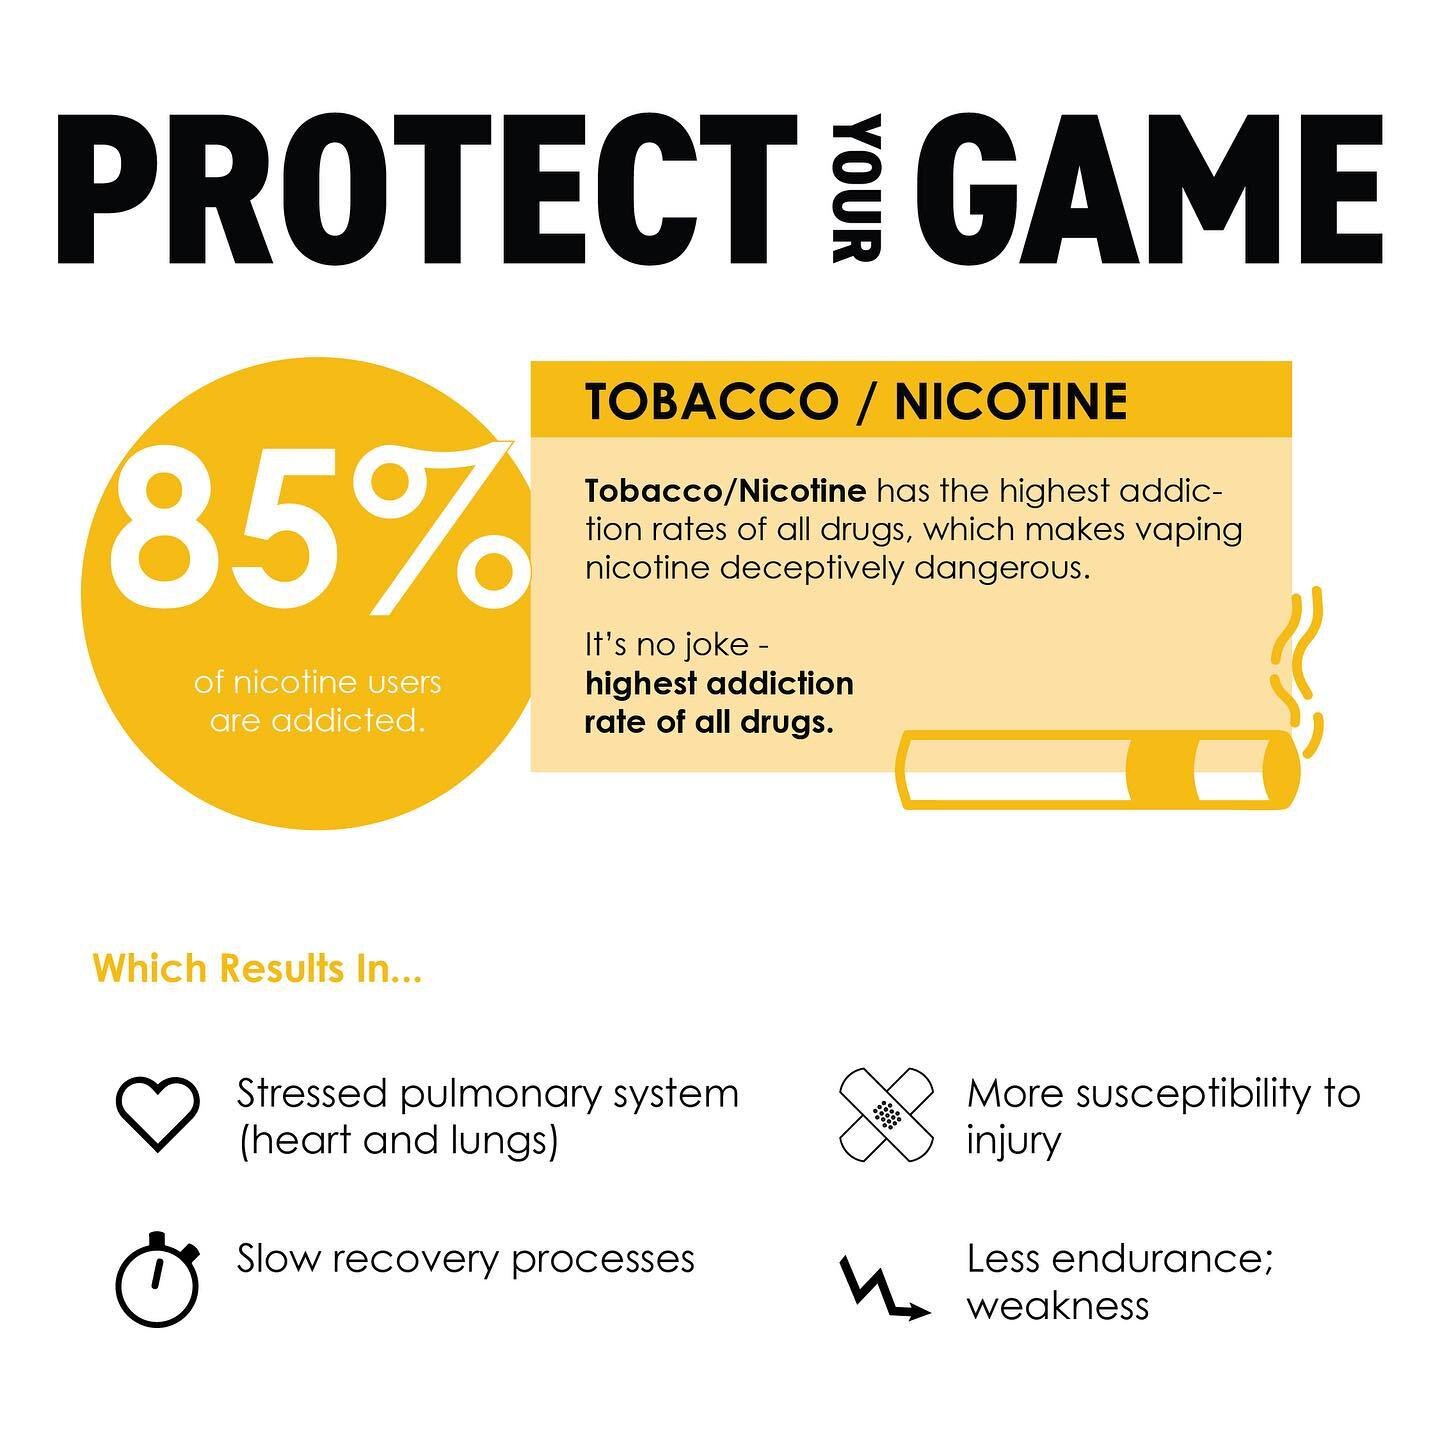 Can you believe Nicotine is so addictive?!!!&nbsp; This means vaping just here and there can be deceptively dangerous.&nbsp; Only ~15% of people who vape can do so with little or no consequence.&nbsp;&nbsp;

#ProtectYourGame, #PYG, #SubstanceFreeAthl